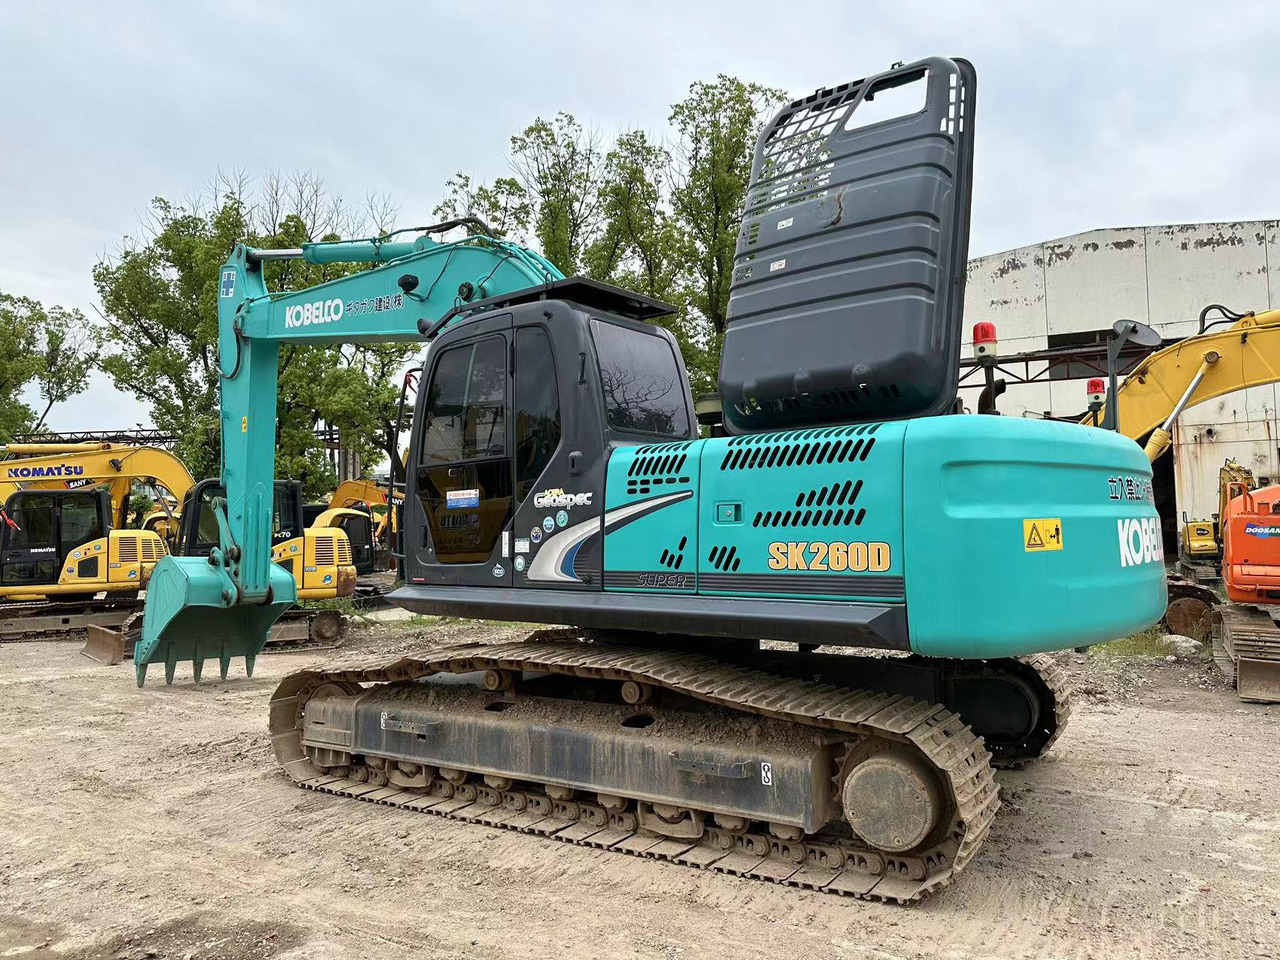 Crawler excavator KOBELCO 26 ton original used excavator SK260D, Large engineering construction machinery good condition low price for sale: picture 3